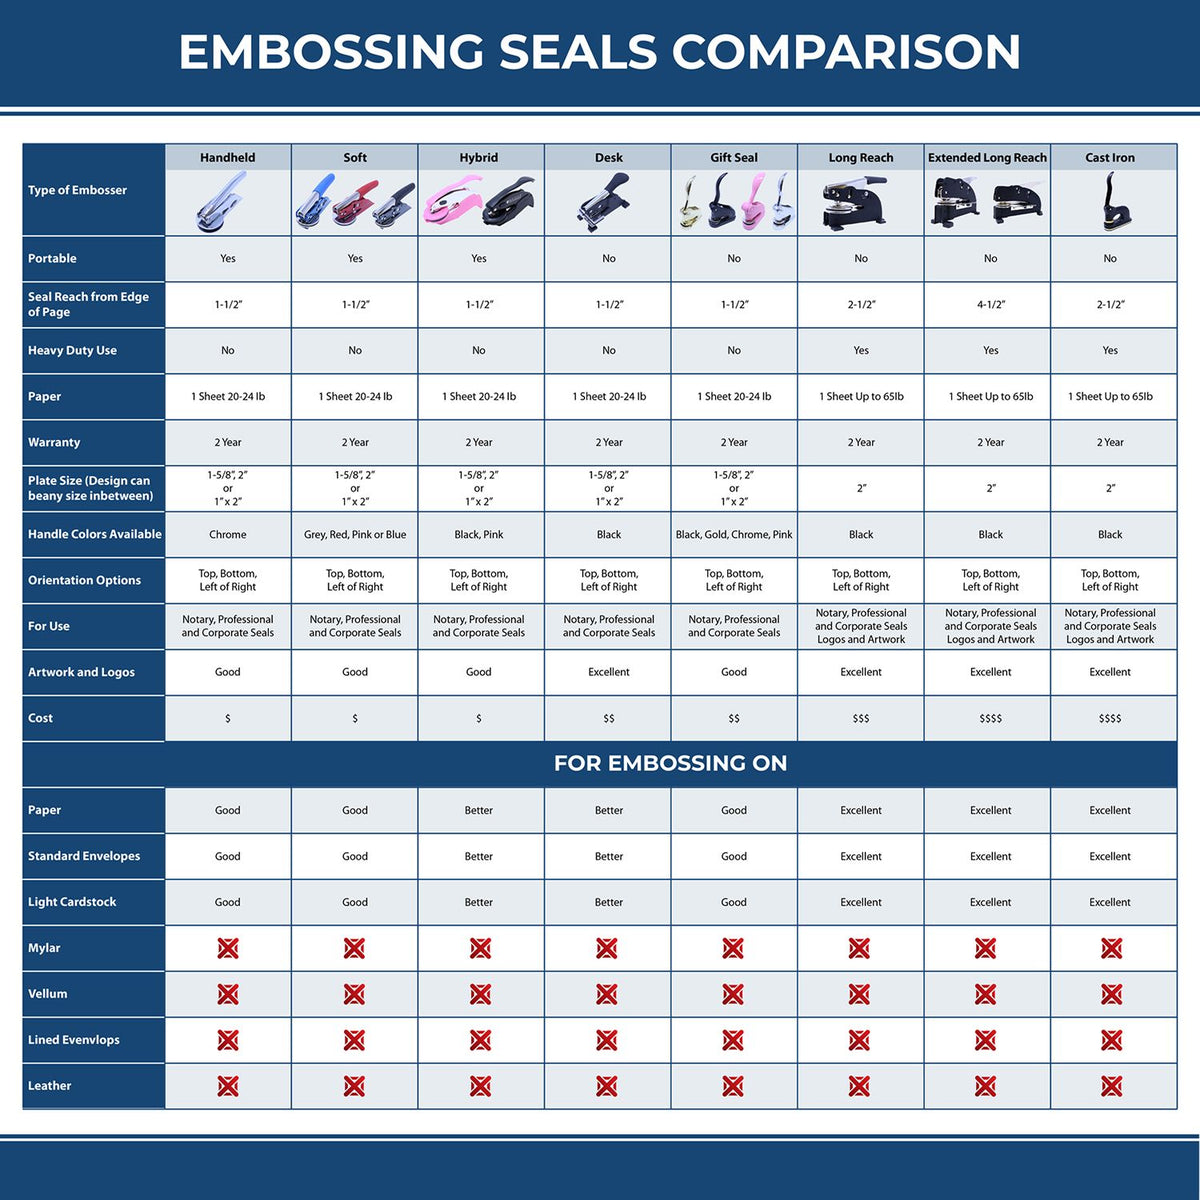 A comparison chart for the different types of mount models available for the Soft Pocket New York Landscape Architect Embosser.